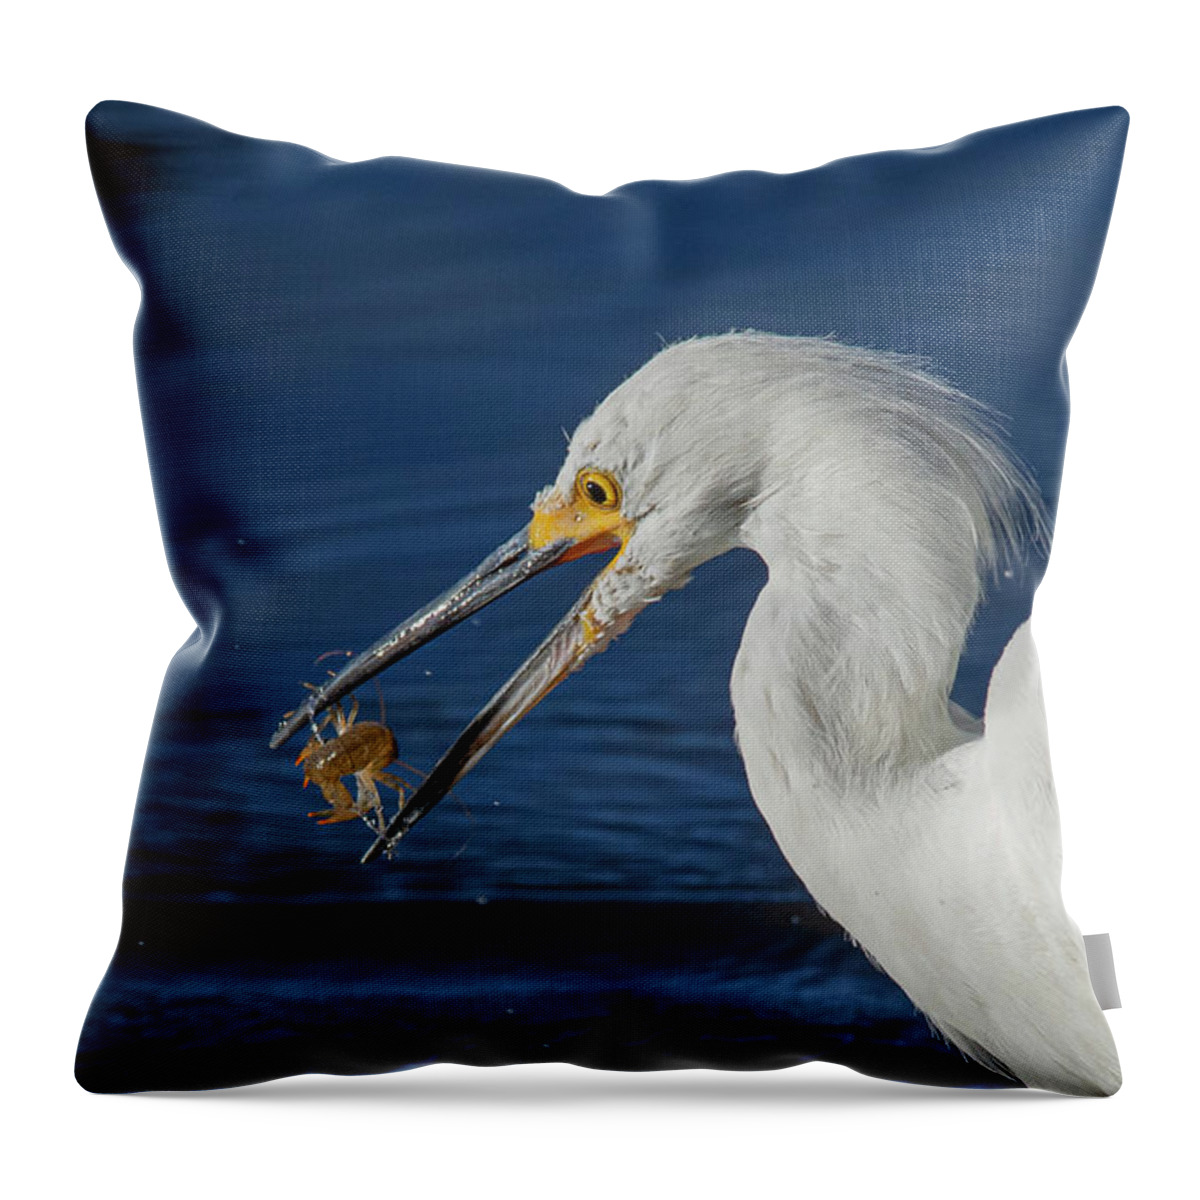 Snowy White Egret Throw Pillow featuring the photograph Snowy White Egret 2 by Rick Mosher